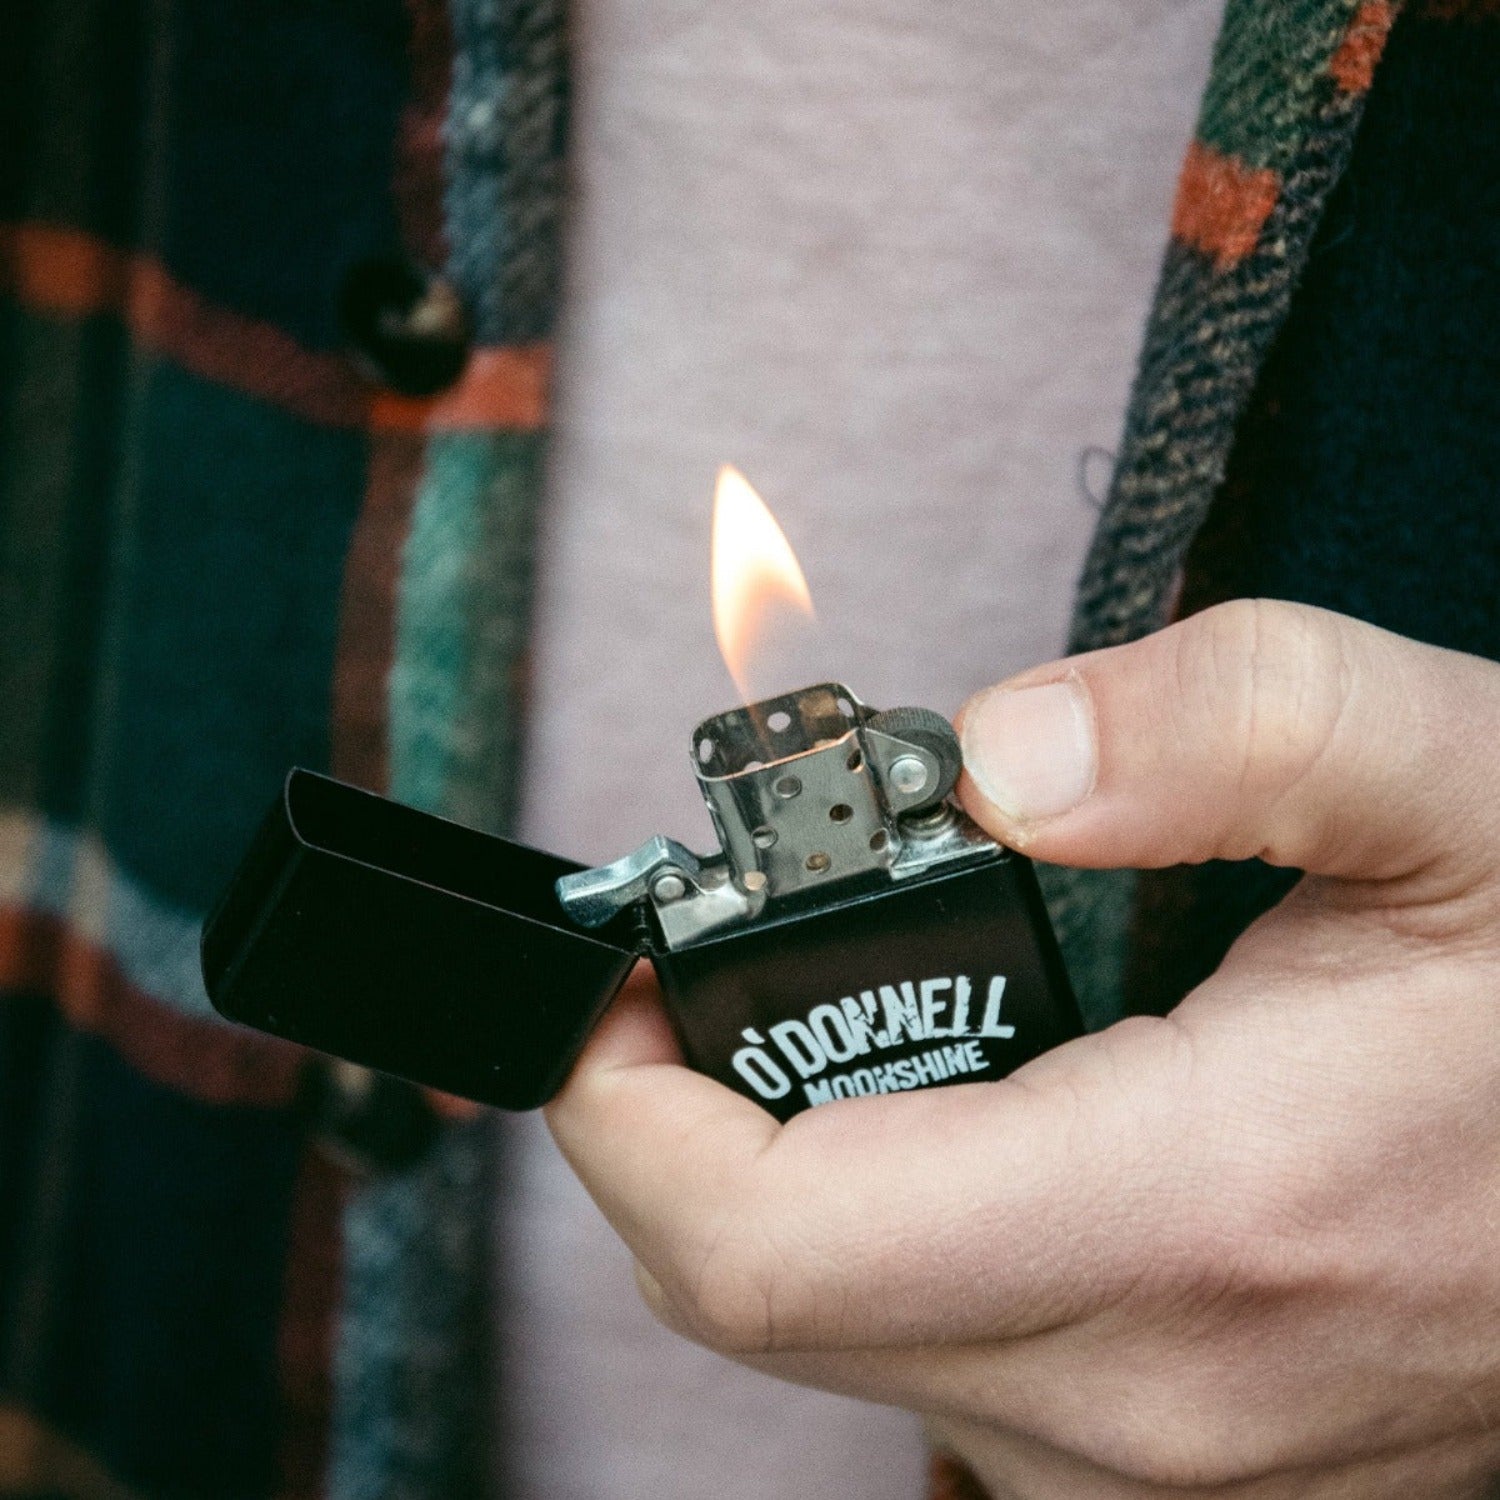 O Donnell Moonshine Lighter in use